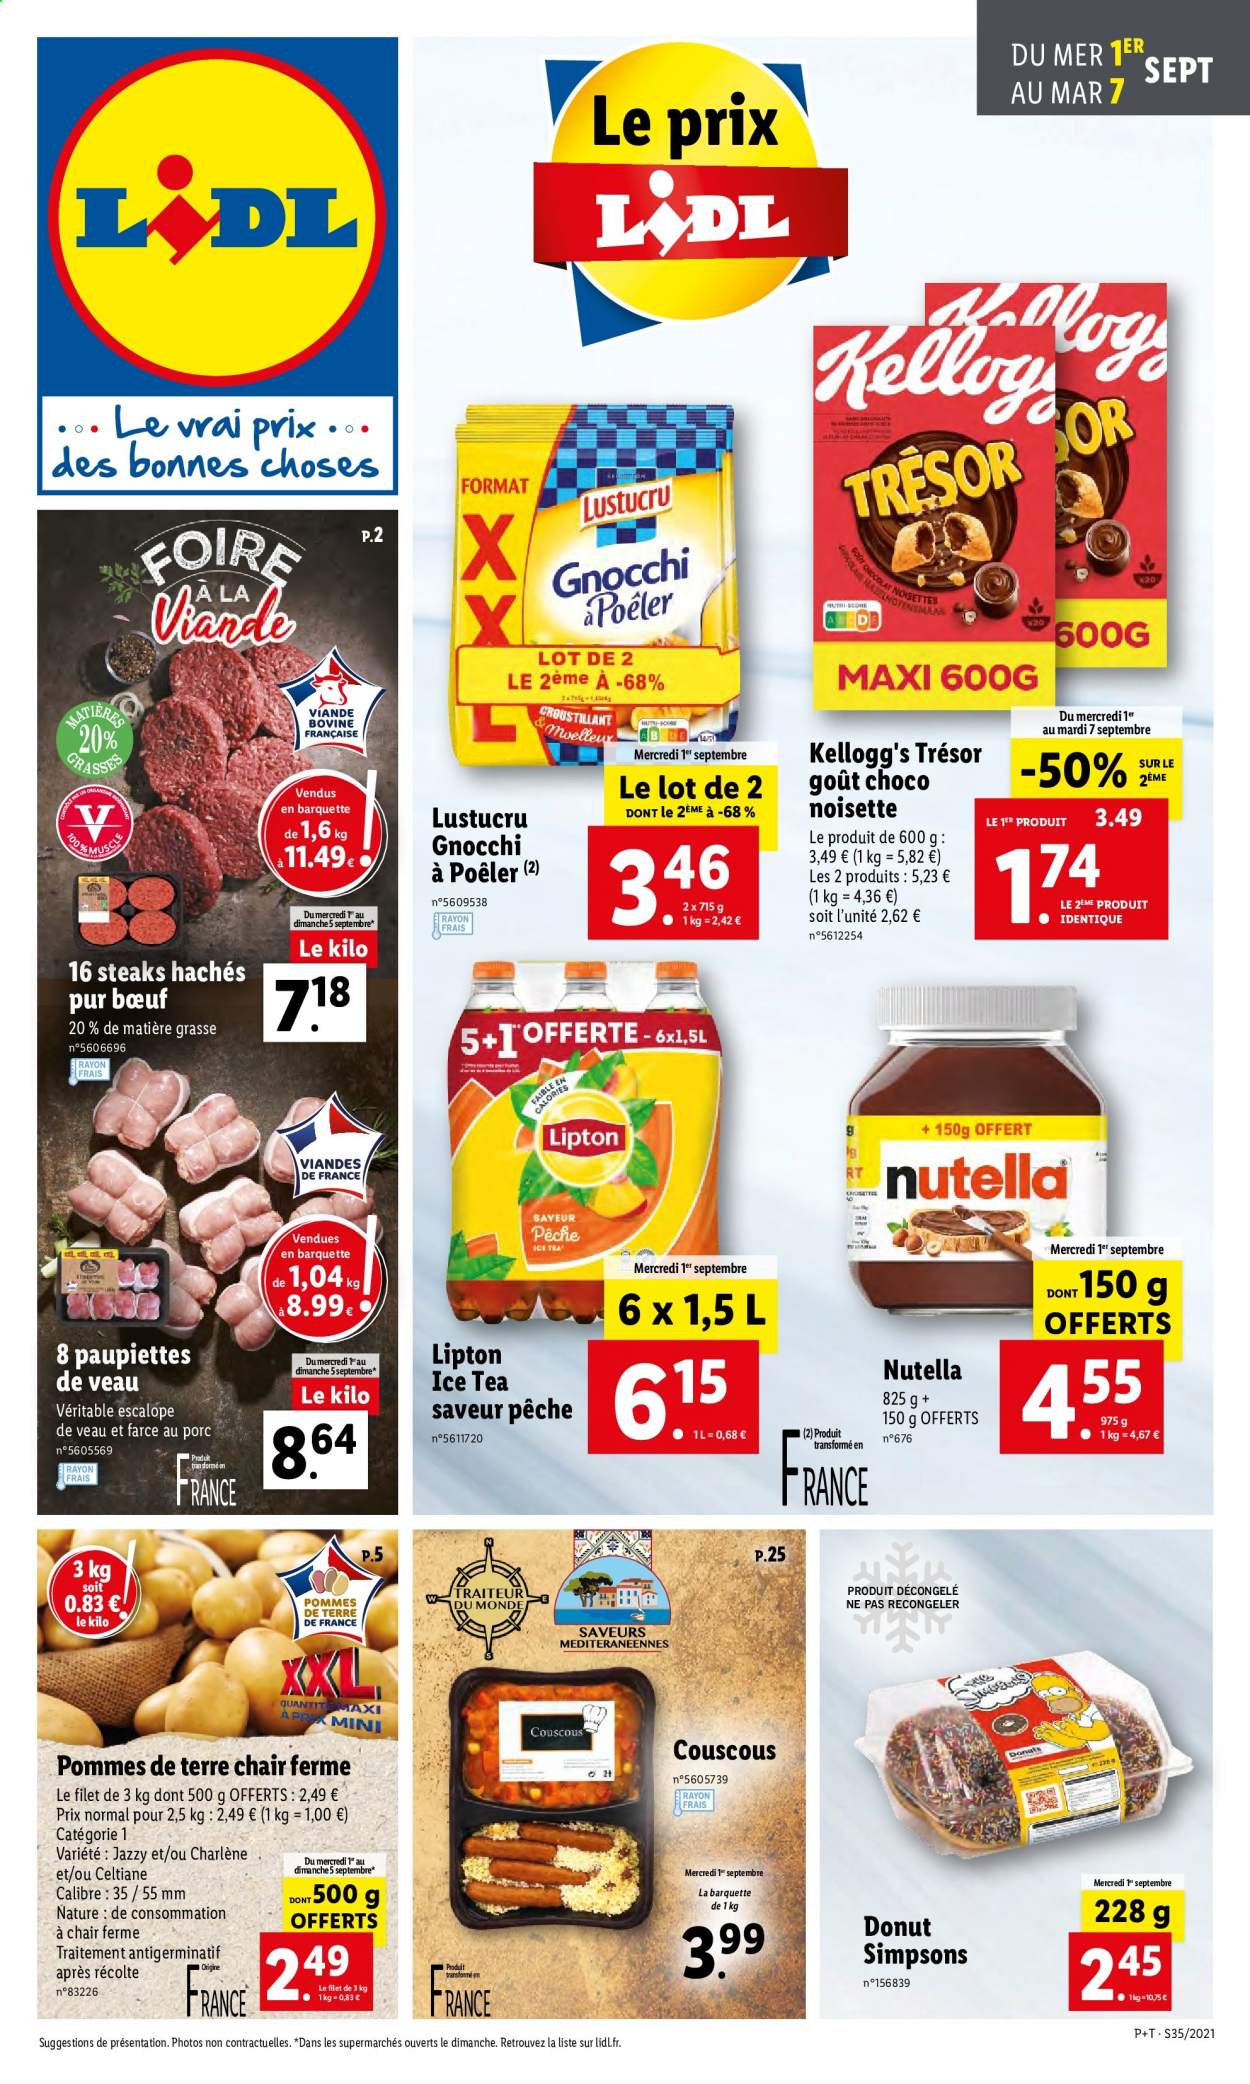 Catalogue Lidl - 01.09.2021 - 07.09.2021. Page 1.